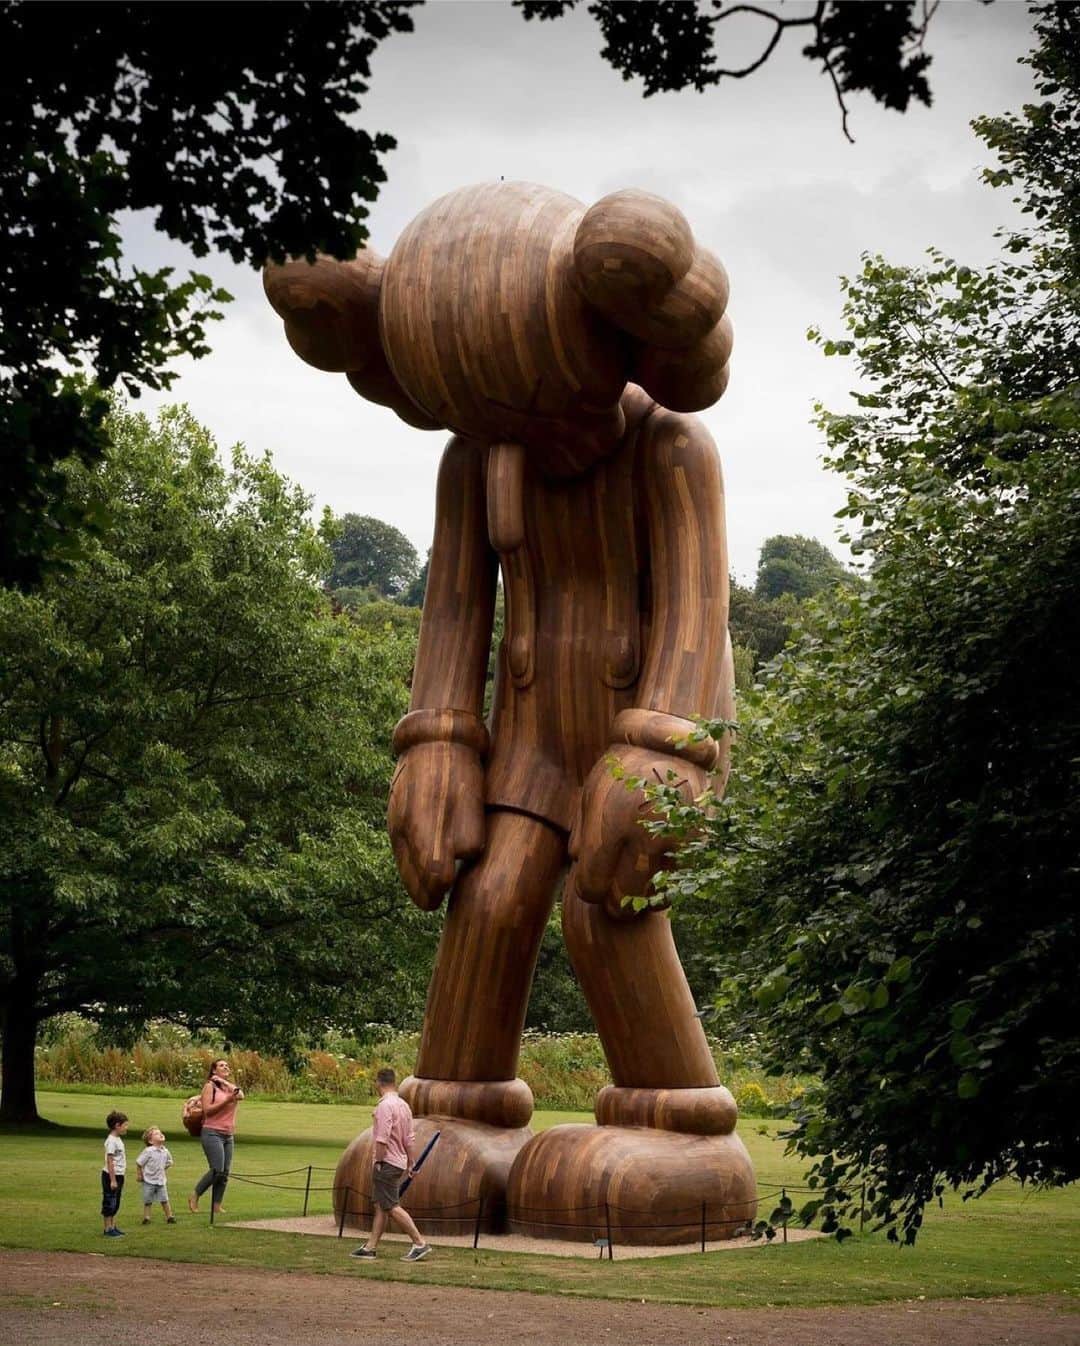 KAWSONEのインスタグラム：「Repost from @yspsculpture • KAWS is a new publication from Phaidon celebrating the work of the influential and much-loved artist, co-written by YSP Director Clare Lilley.⁠ ⁠ Beginning his career as a street artist in the 1990s, KAWS work reaches beyond the art world into the realms of fashion, music, and popular culture at large. His 2016 exhibition at YSP remains a favourite with staff and visitors.⁠ ⁠ The book is available to order at YSP Shop, online and in store.⁠ ⁠ Find out more at 🔗 in bio - YSP Shop⁠ ⁠ KAWS, installation views at YSP, 2016 📷️ @jontywilde⁠ ⁠ #YSP ⁠@kaws @phaidonpress @clare.lilley @YSPShops #KAWS⁠  #Wakefield #Yorkshire #Sculpture #OutdoorGallery #ArtAndNature #ArtOutdoors #ExploreArtOutside #ContemporarySculpture #SculptureLovers #MyWakefield @aceagrams @mywakefield @ysi_sculpture @experiencewakefield」